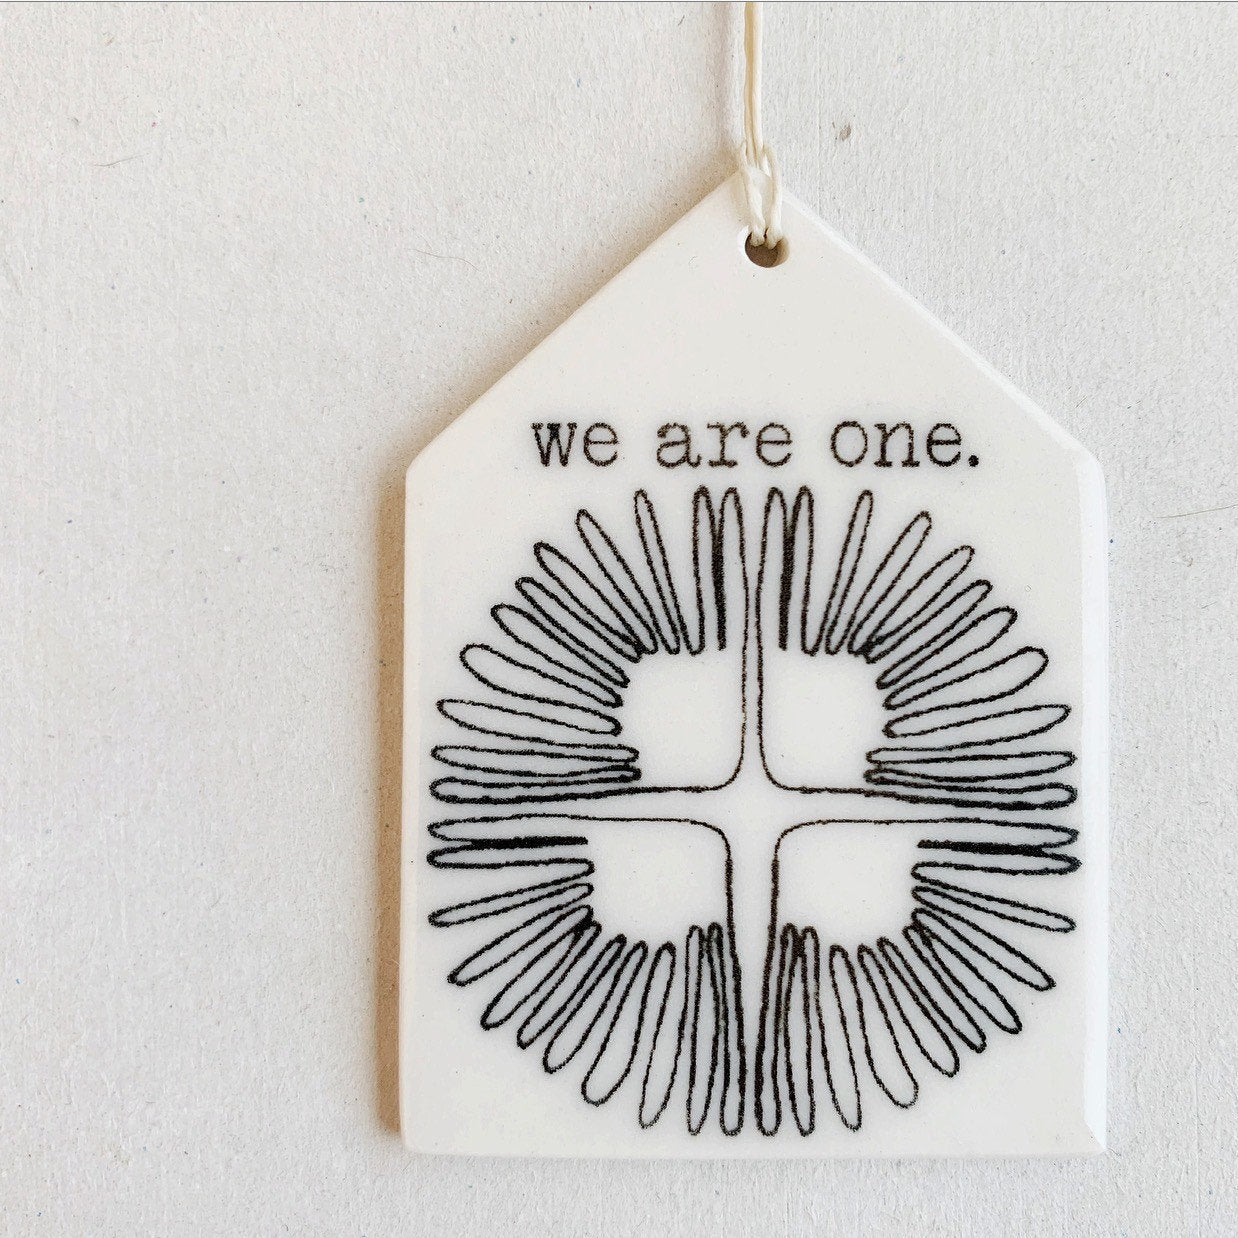 we are one | ceramic wall tag | ceramic wall art | minimalist design | home decor | meaningful gift | one consciousness | hand drawn pattern